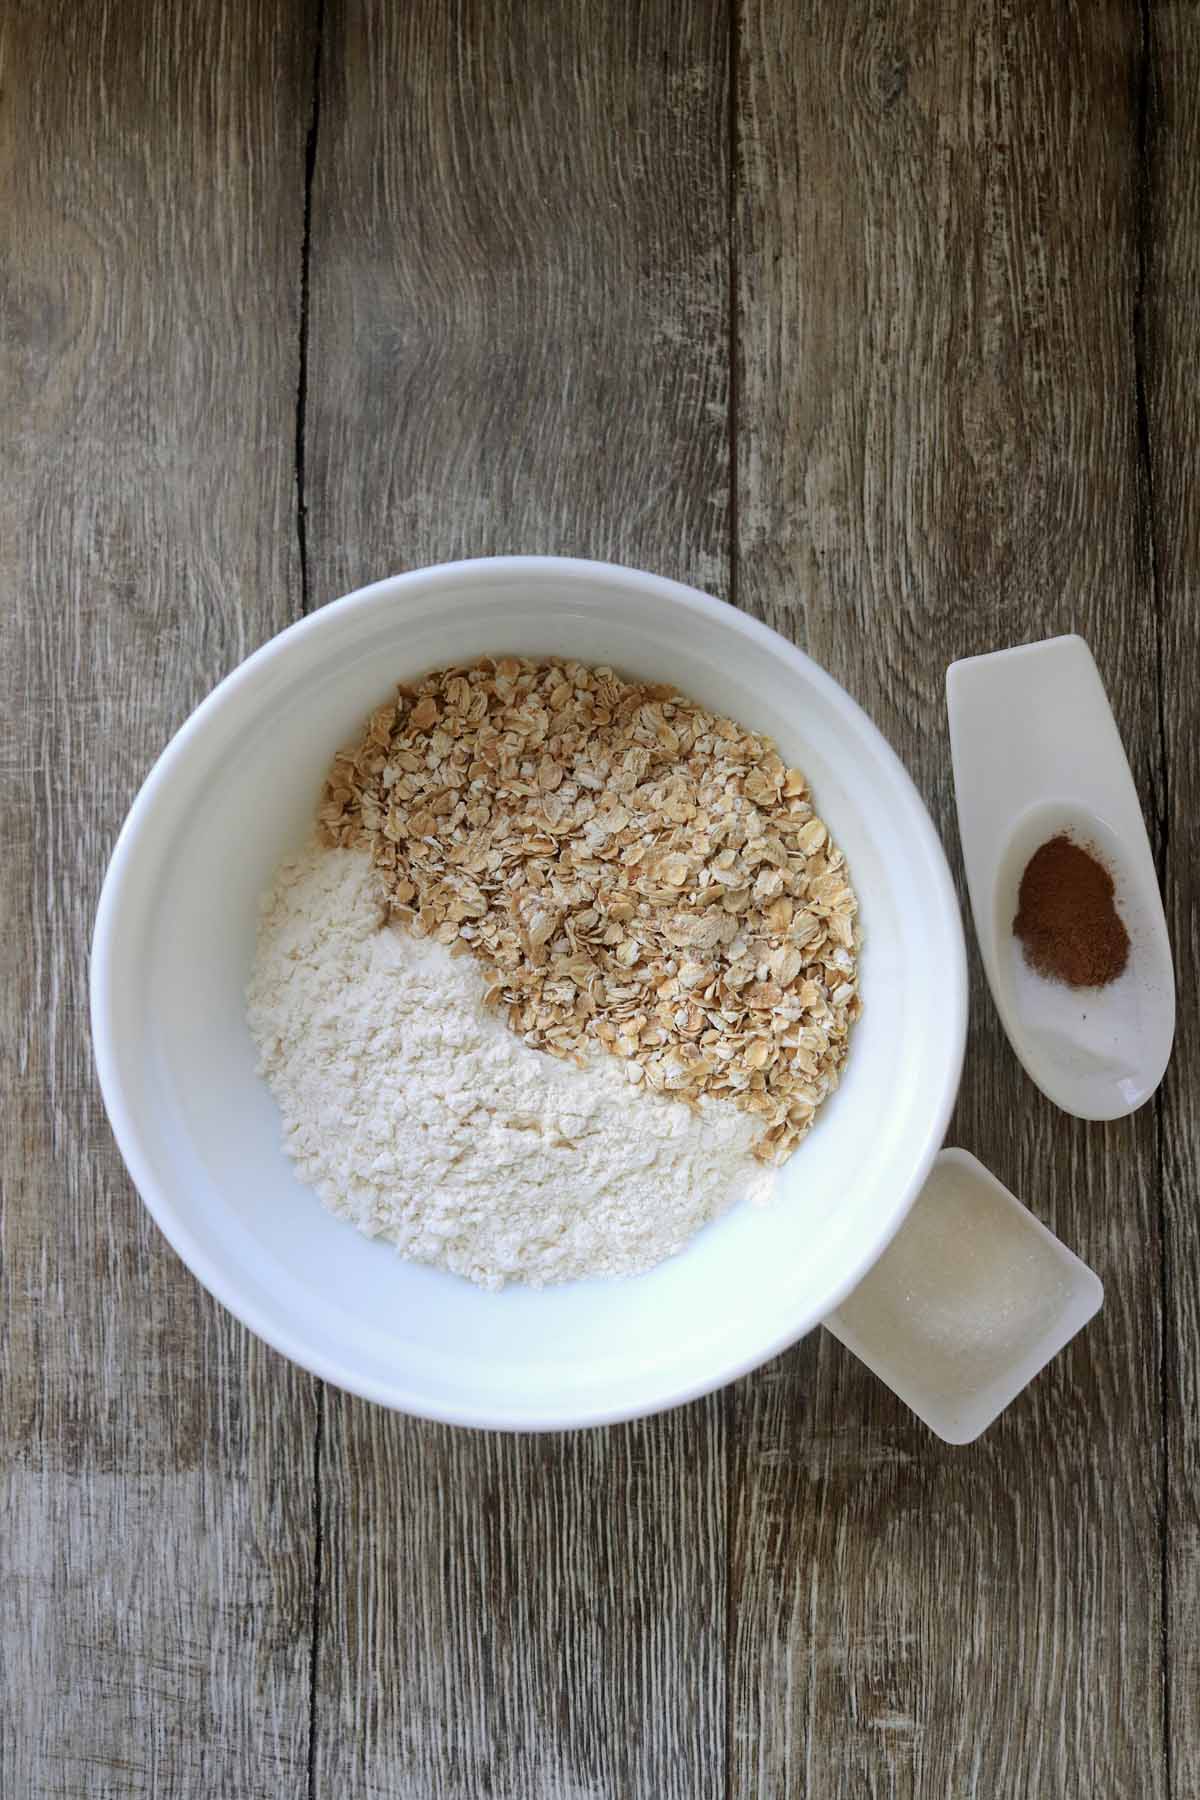 Flour and oats in a mixing bowl.